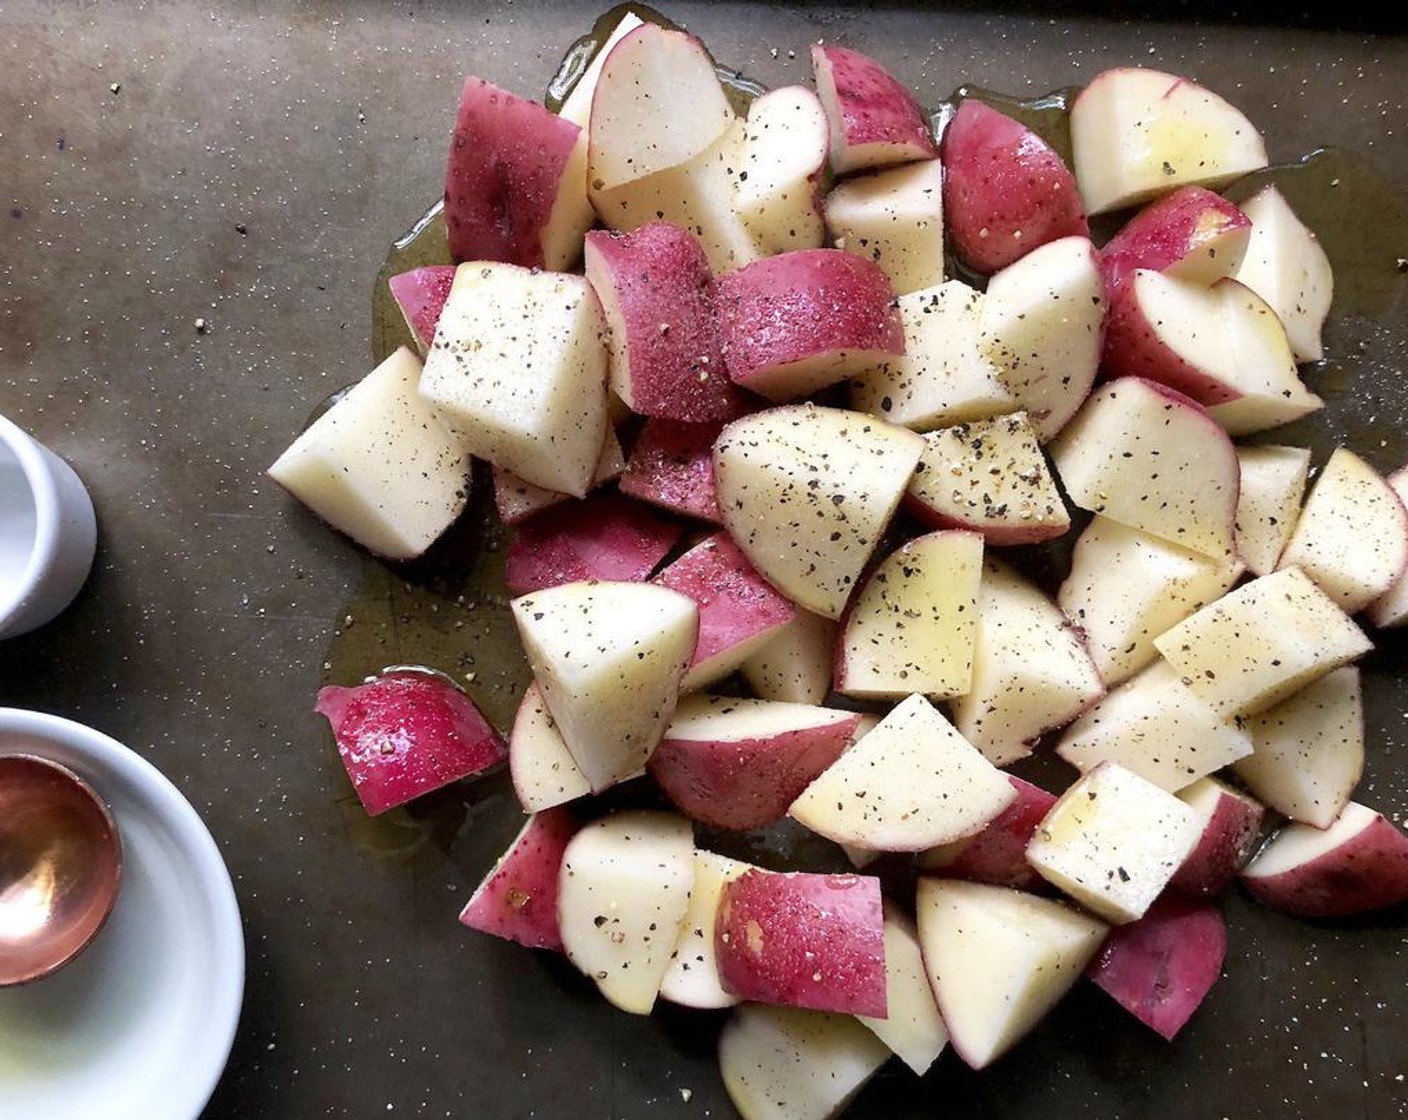 step 2 Toss the Red Potatoes (4 cups) with the Olive Oil (2 Tbsp), Salt (1/4 tsp), and Freshly Ground Black Pepper (1/4 tsp); arrange in single layer on rimmed baking sheet.  Bake 20 to 25 minutes or until golden brown and tender. Rearrange potatoes halfway through to promote even browning.